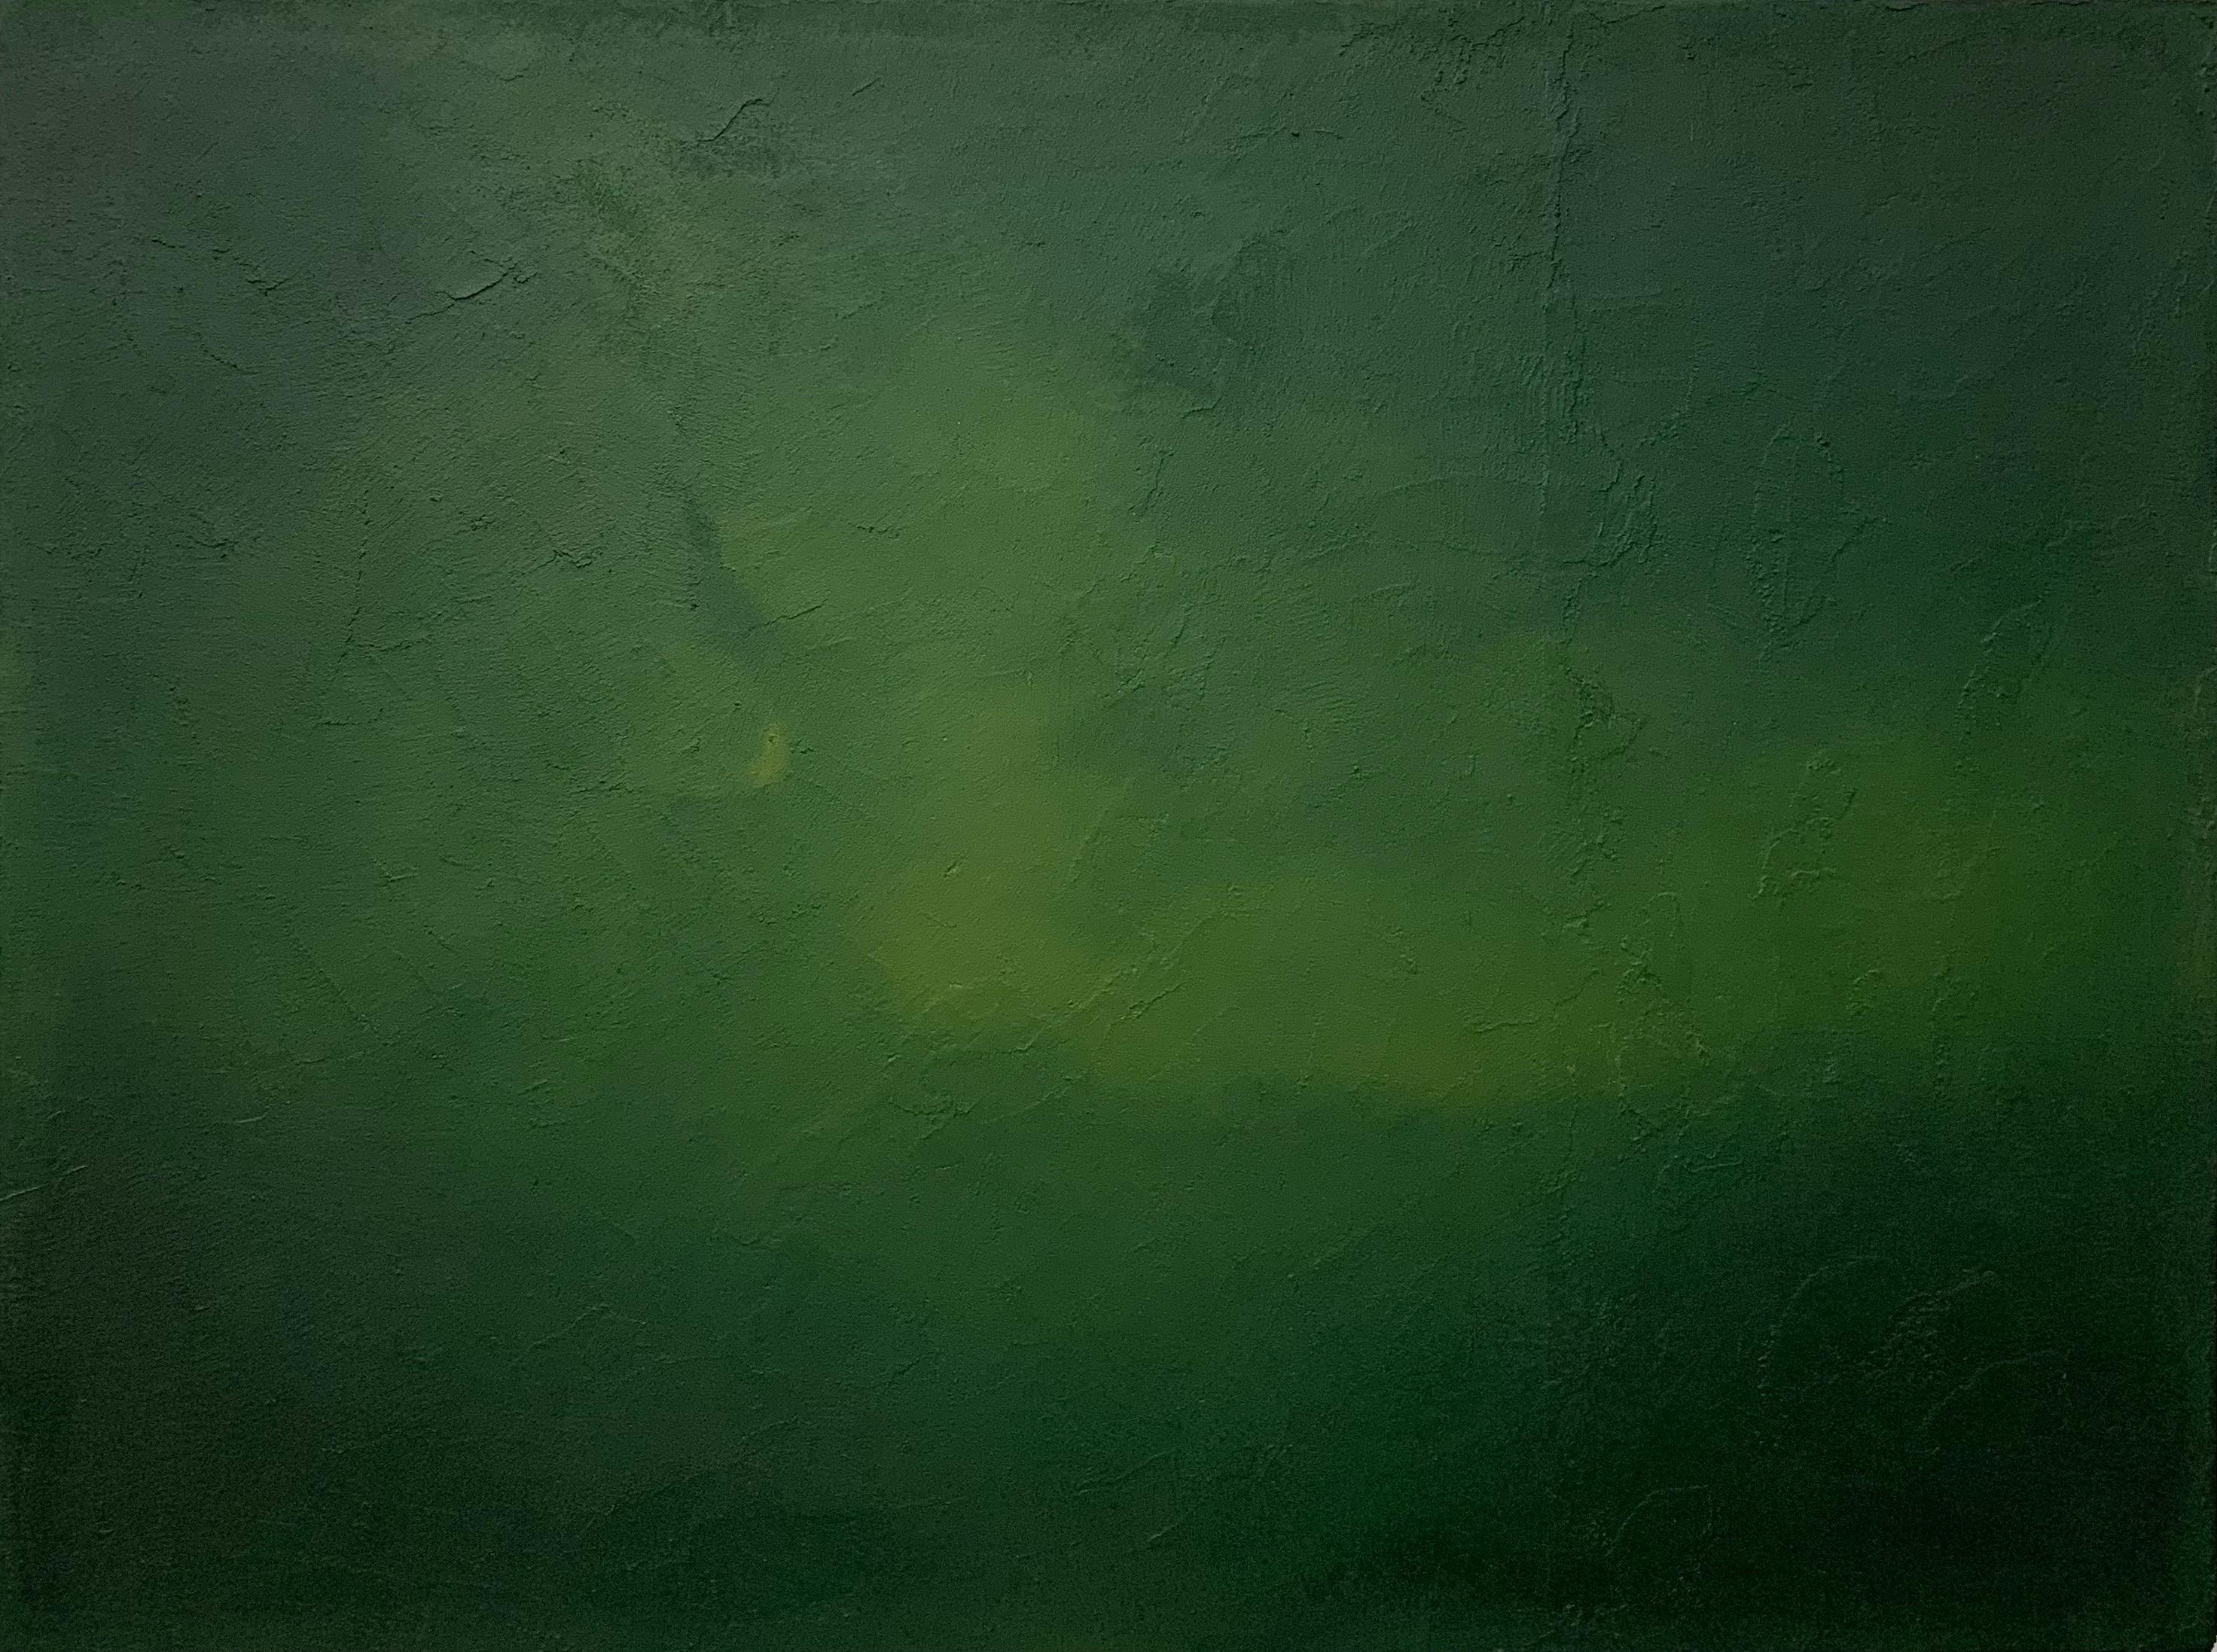 Iryna Antoniuk Landscape Painting - Dark Green and Ocher Sand Effect Abstract Textured Painting